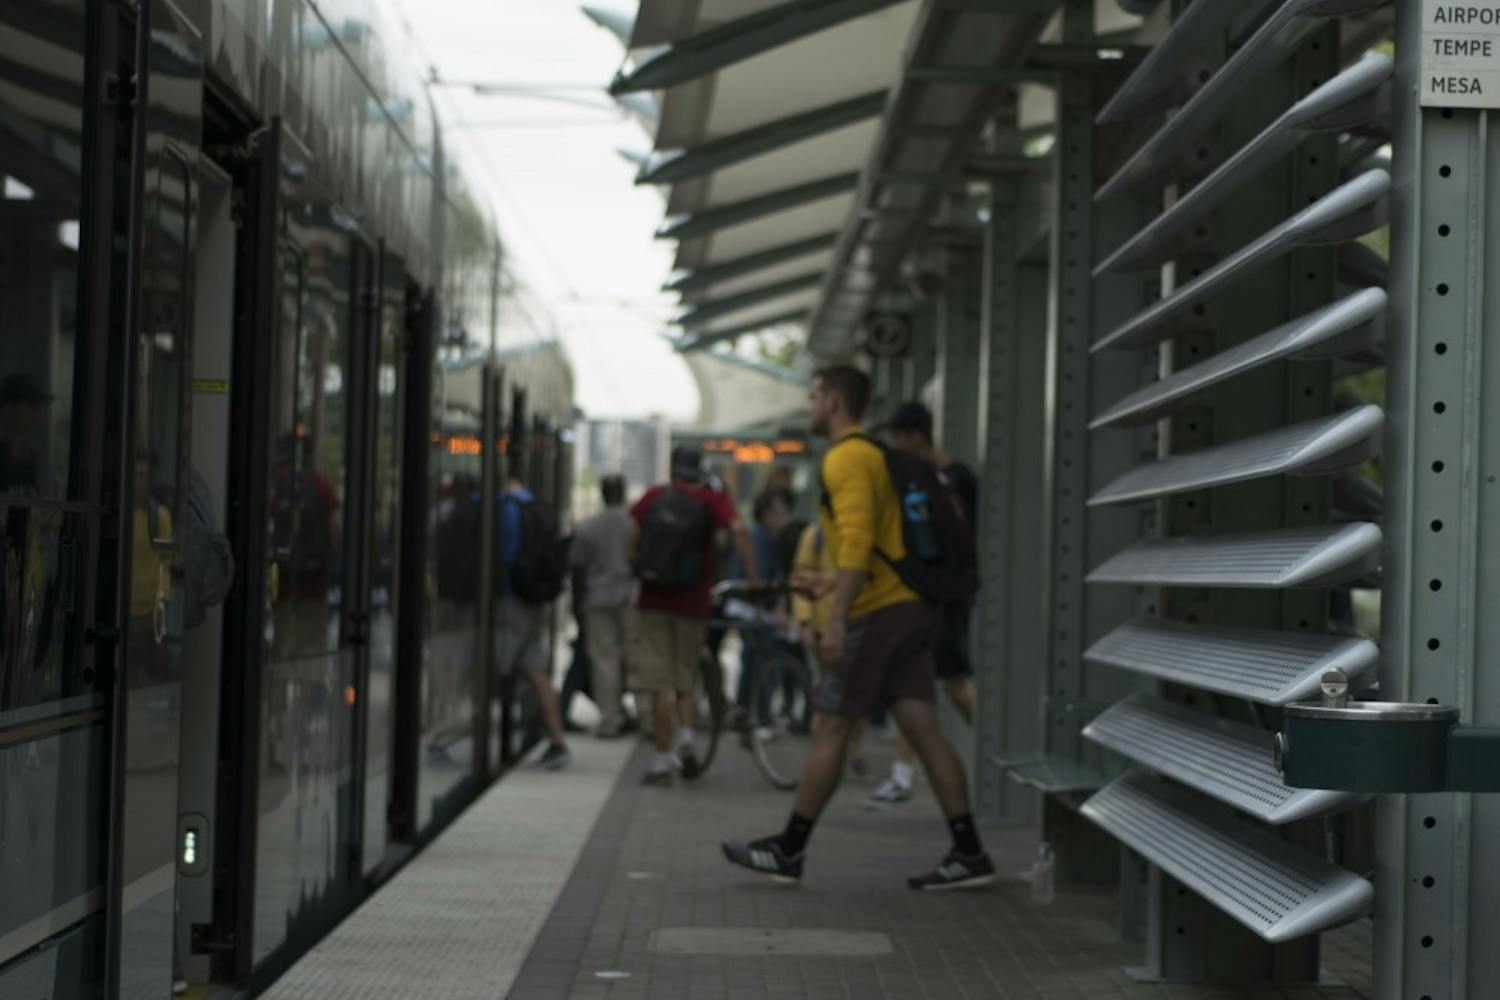 People shuffle on and off the light rail on Wednesday, Nov. 16, 2016, in downtown Phoenix, Arizona.